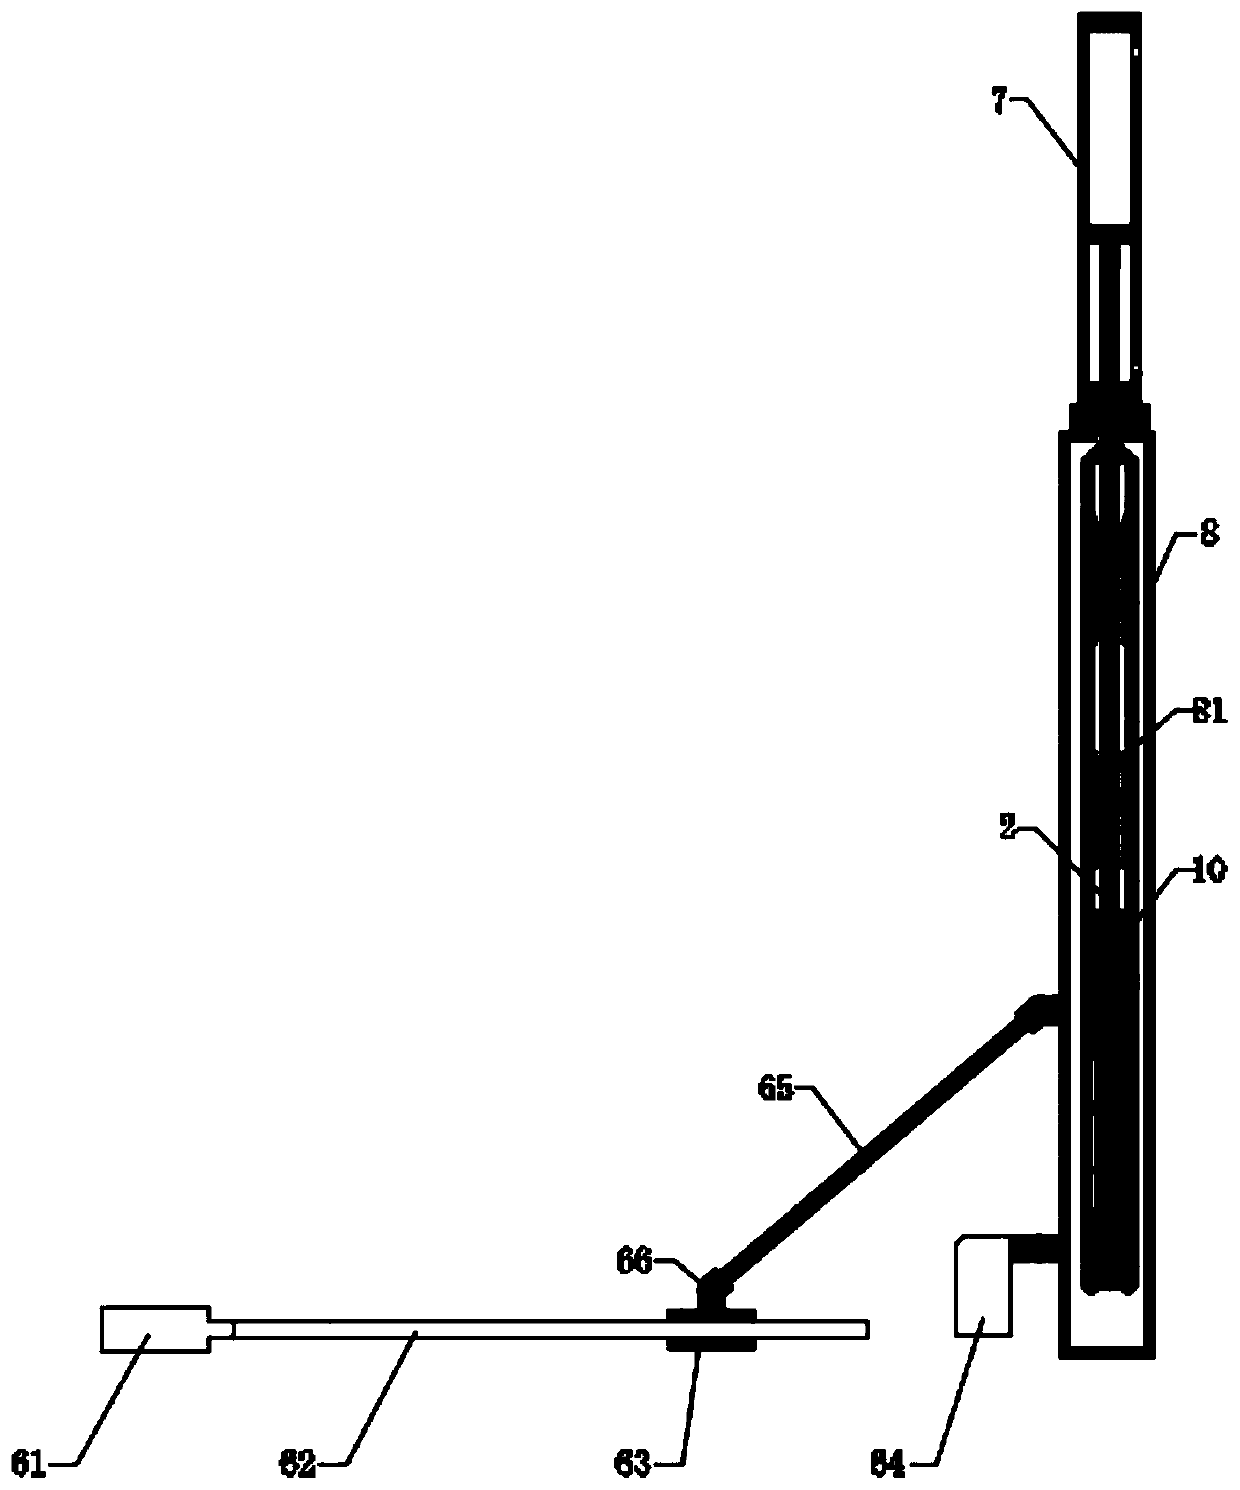 Rotary experiment platform for fidelity coring device